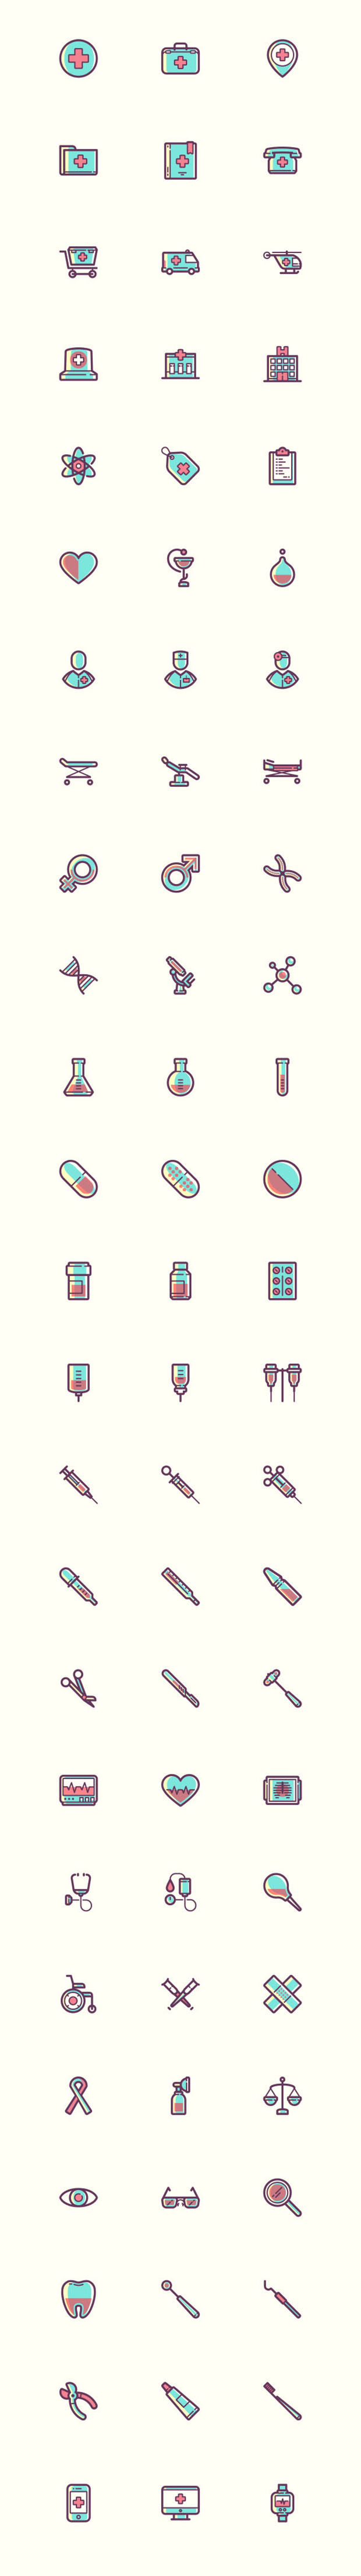 75-medical-icons-Free